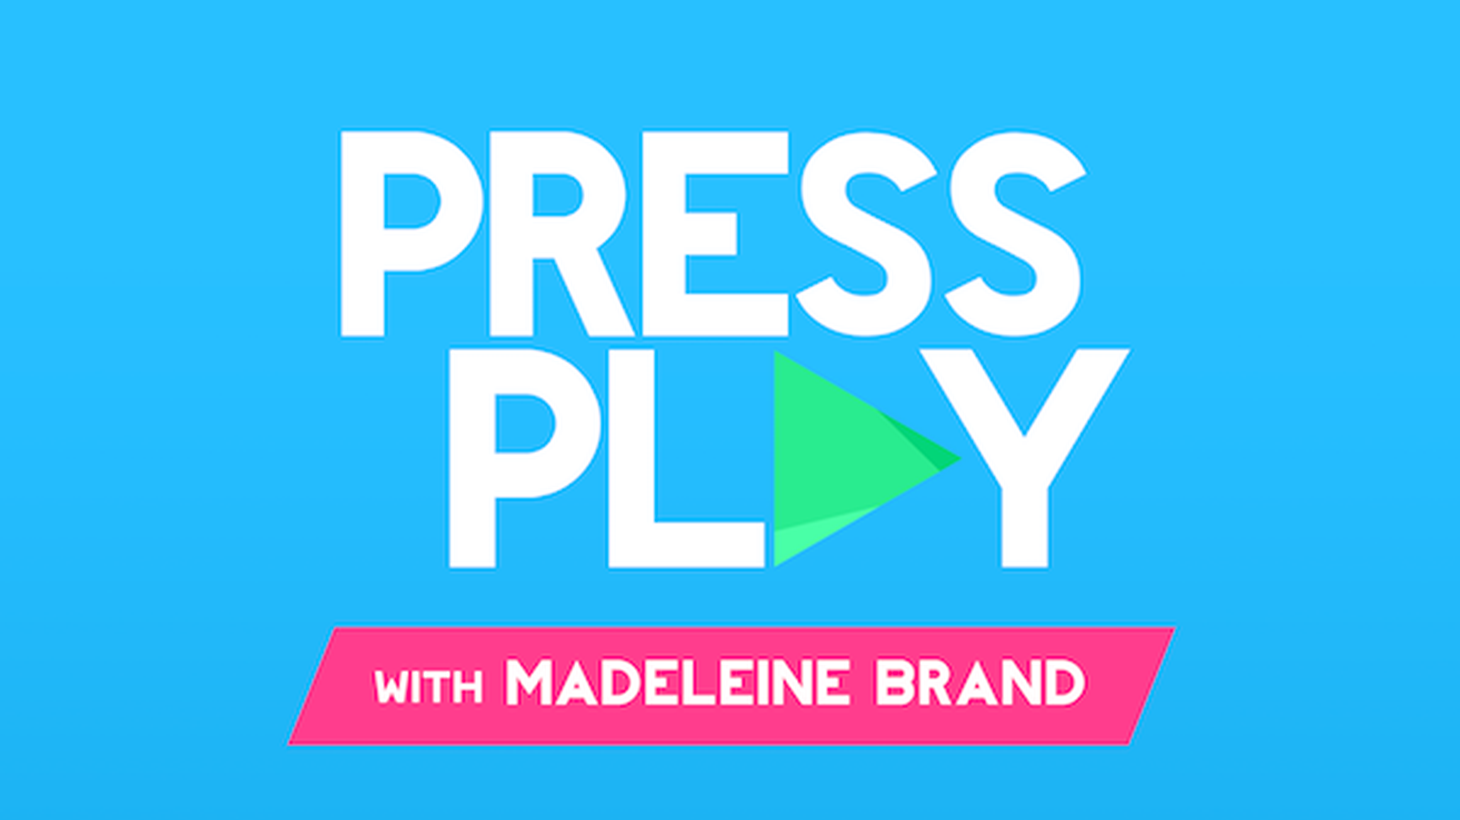 Today on Press Play, California Congresswoman Loretta Sanchez responds to President Obama’s announcement that he will delay executive action on immigration reform. And we hear what Ray Rice’s domestic abuse story says about the NFL.